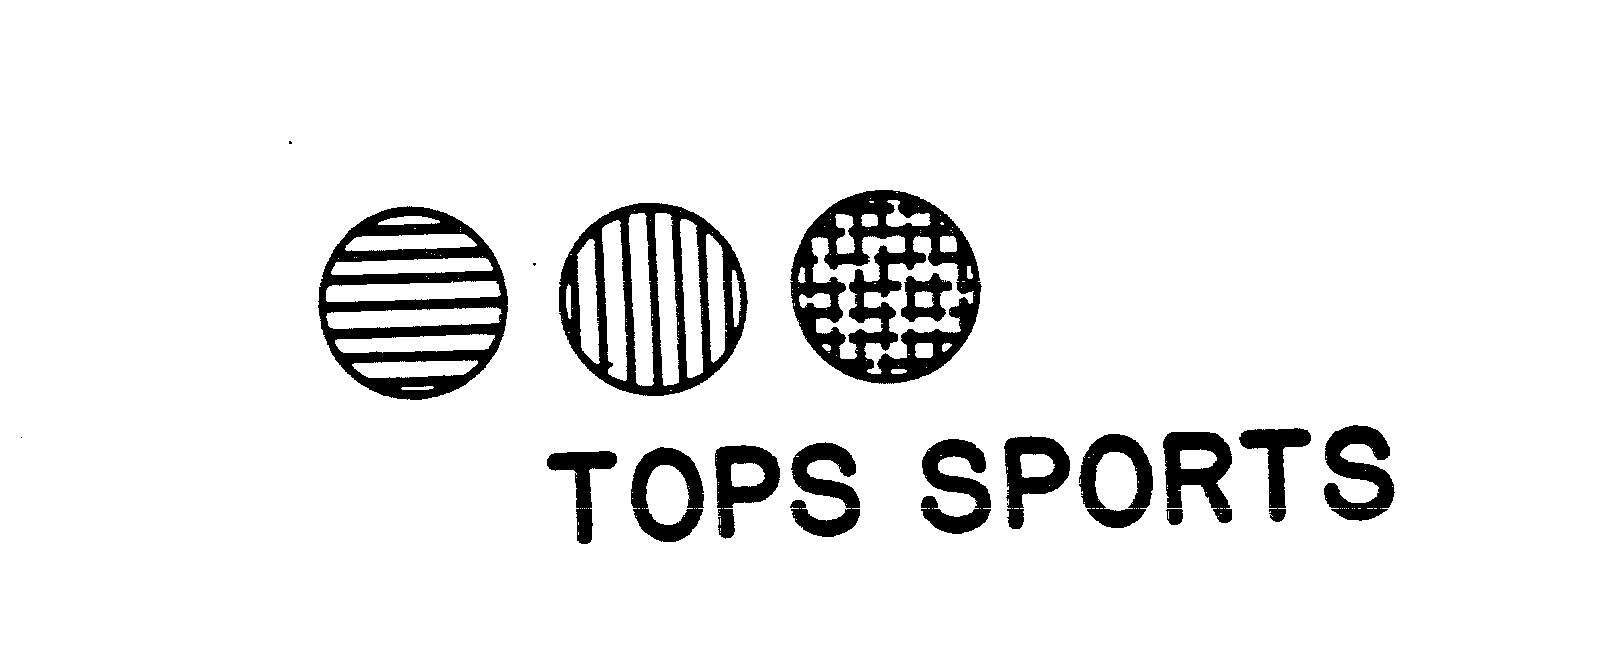  TOPS SPORTS